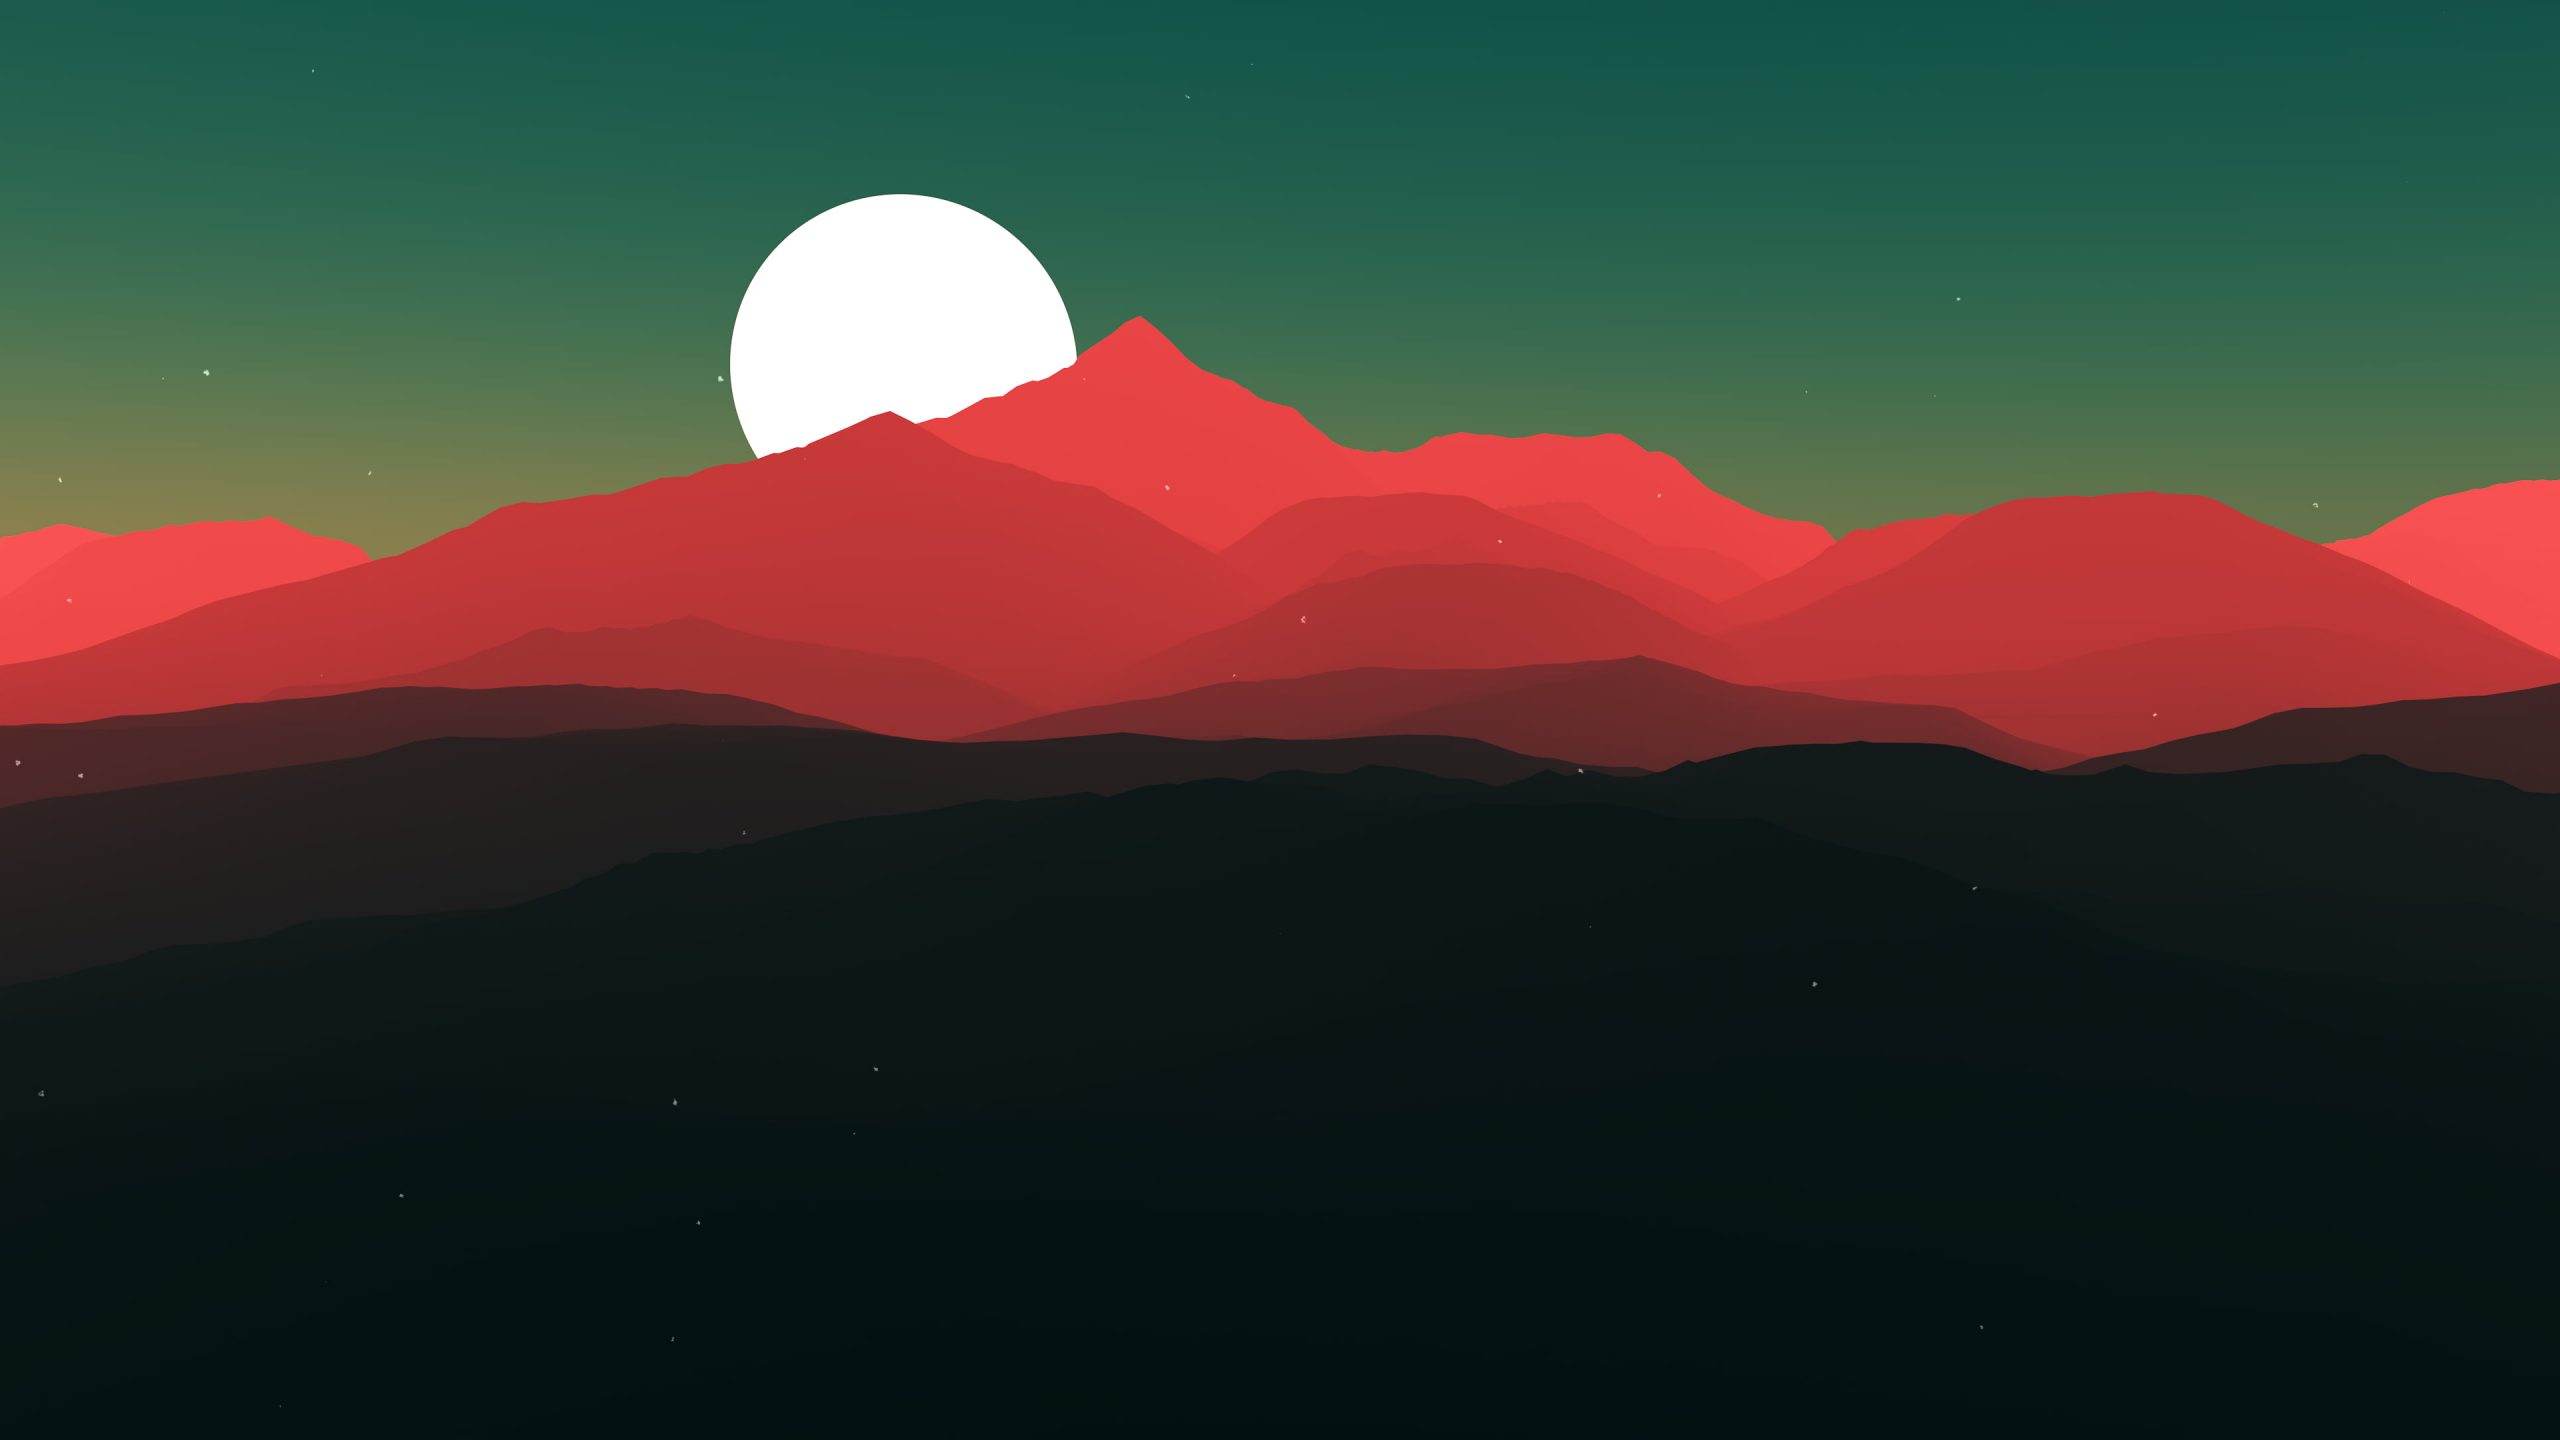 Red mountains and moon digital wallpaper, red mountain illustration